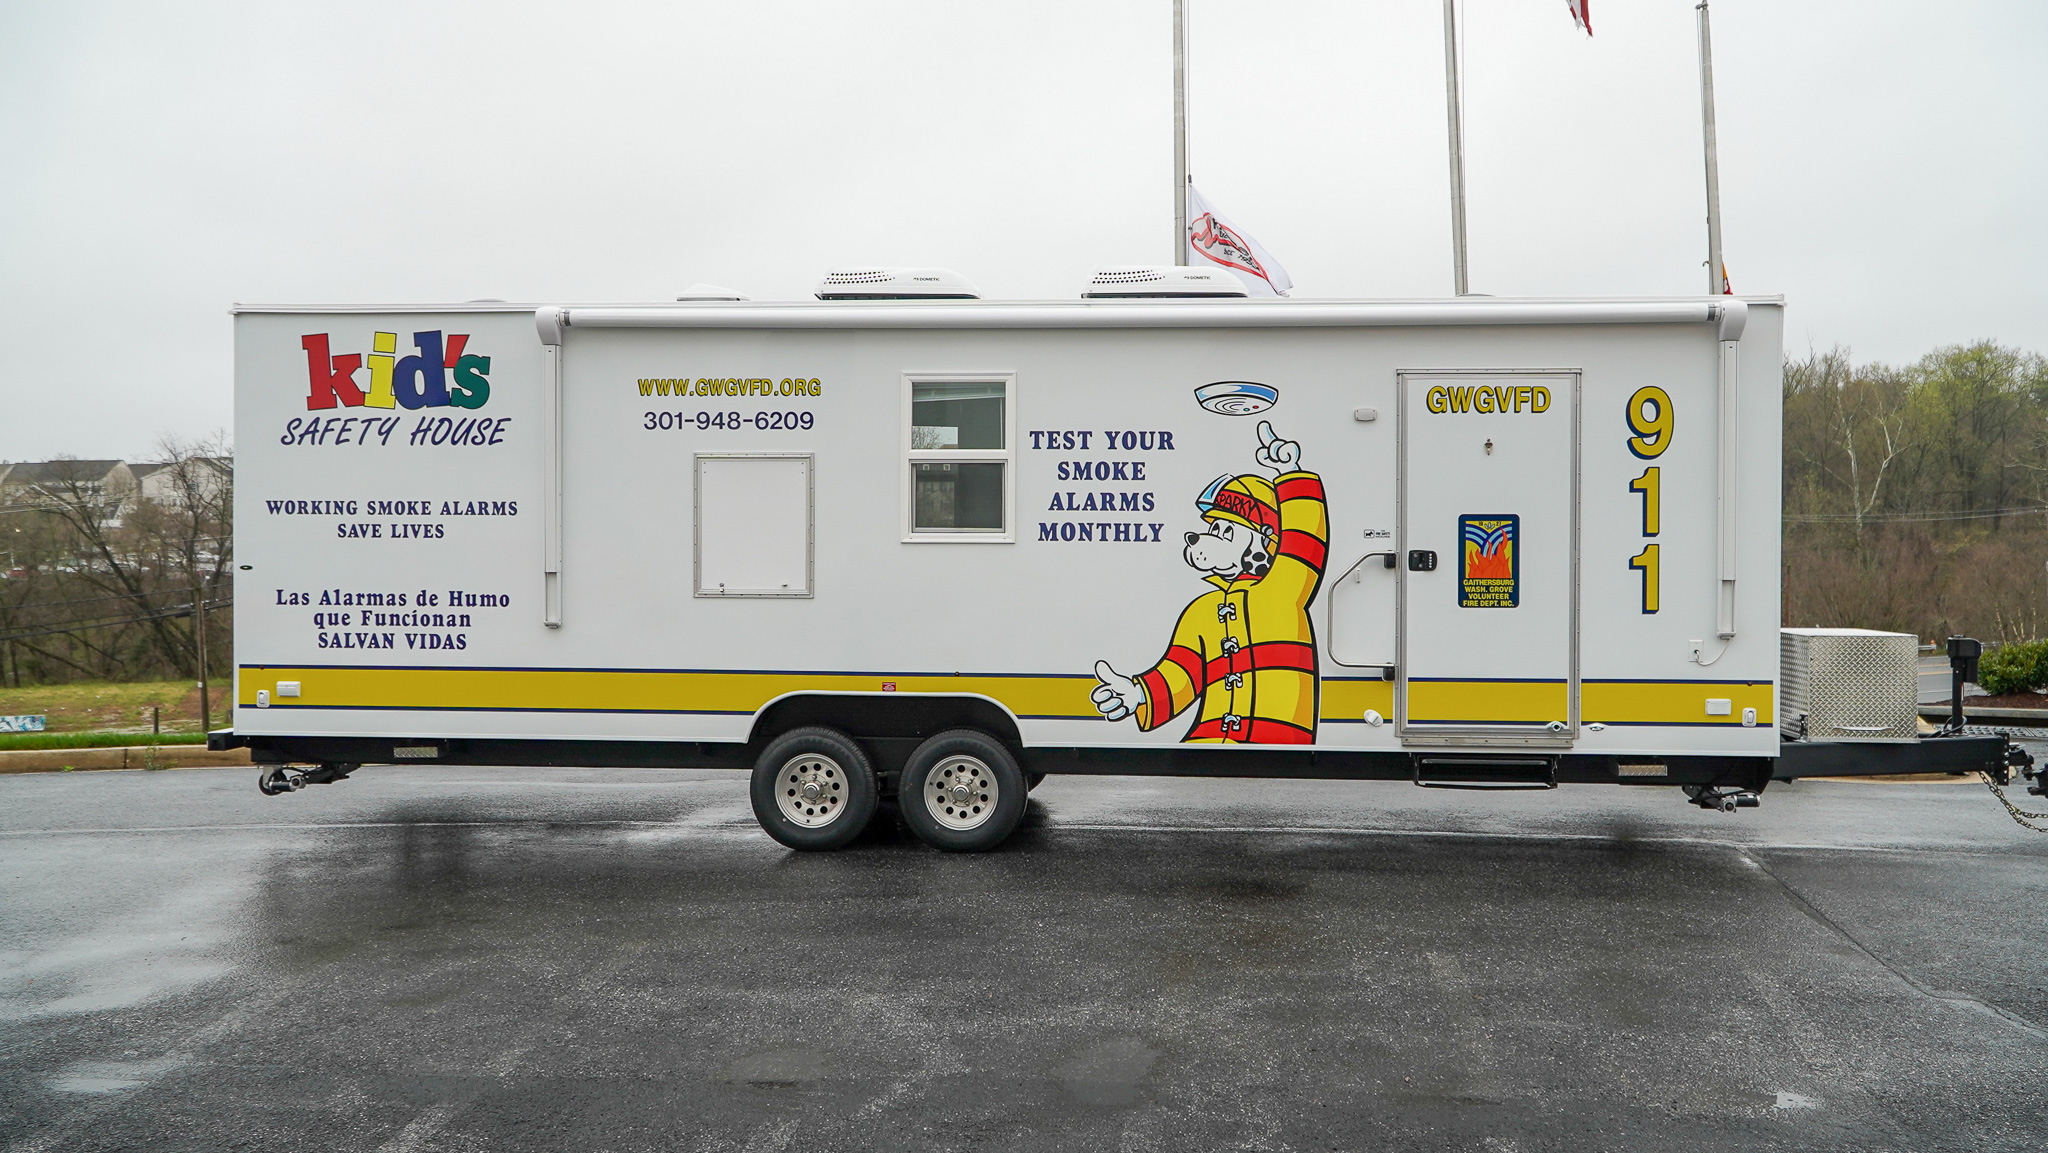 A side view of the unit for Gaithersburg, MD.